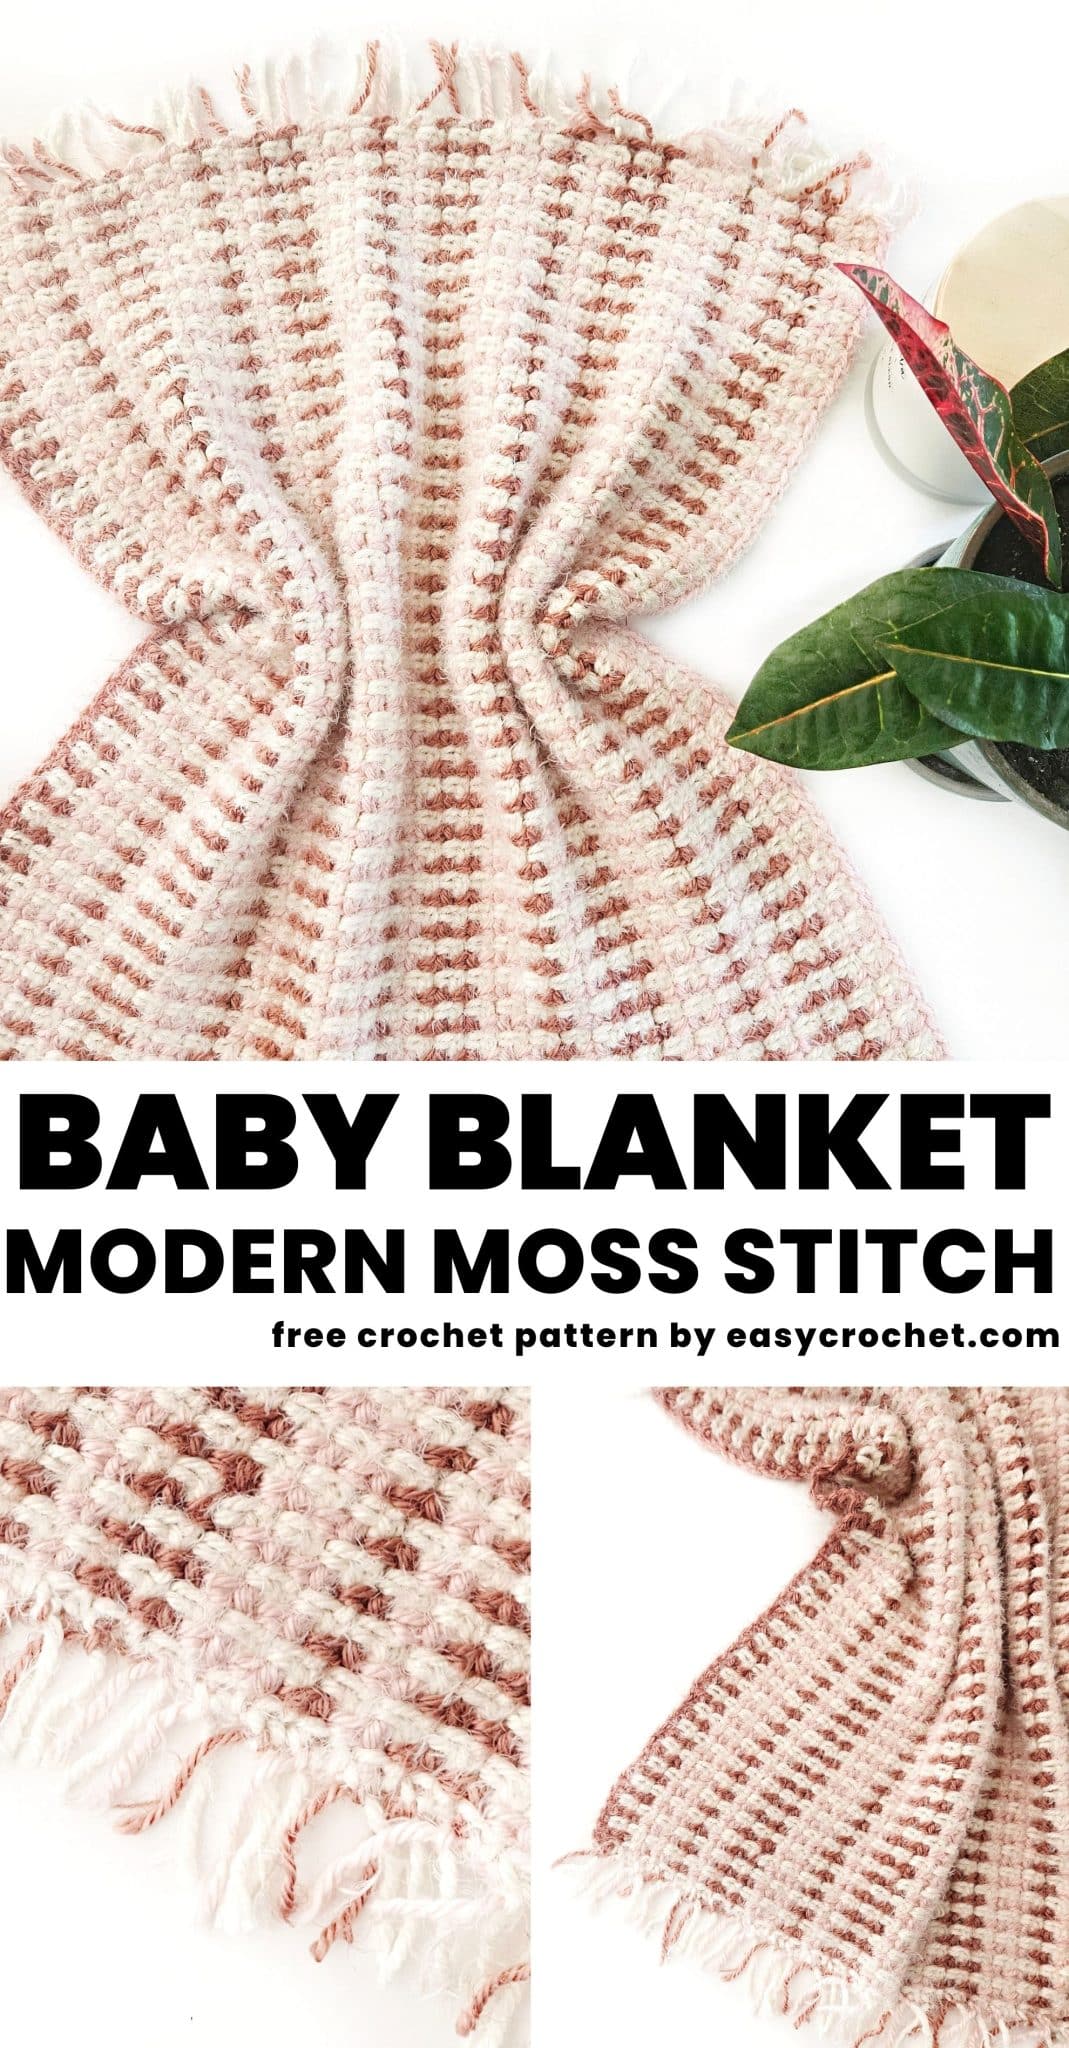 free crochet pattern for an easy moss stitch baby blanket